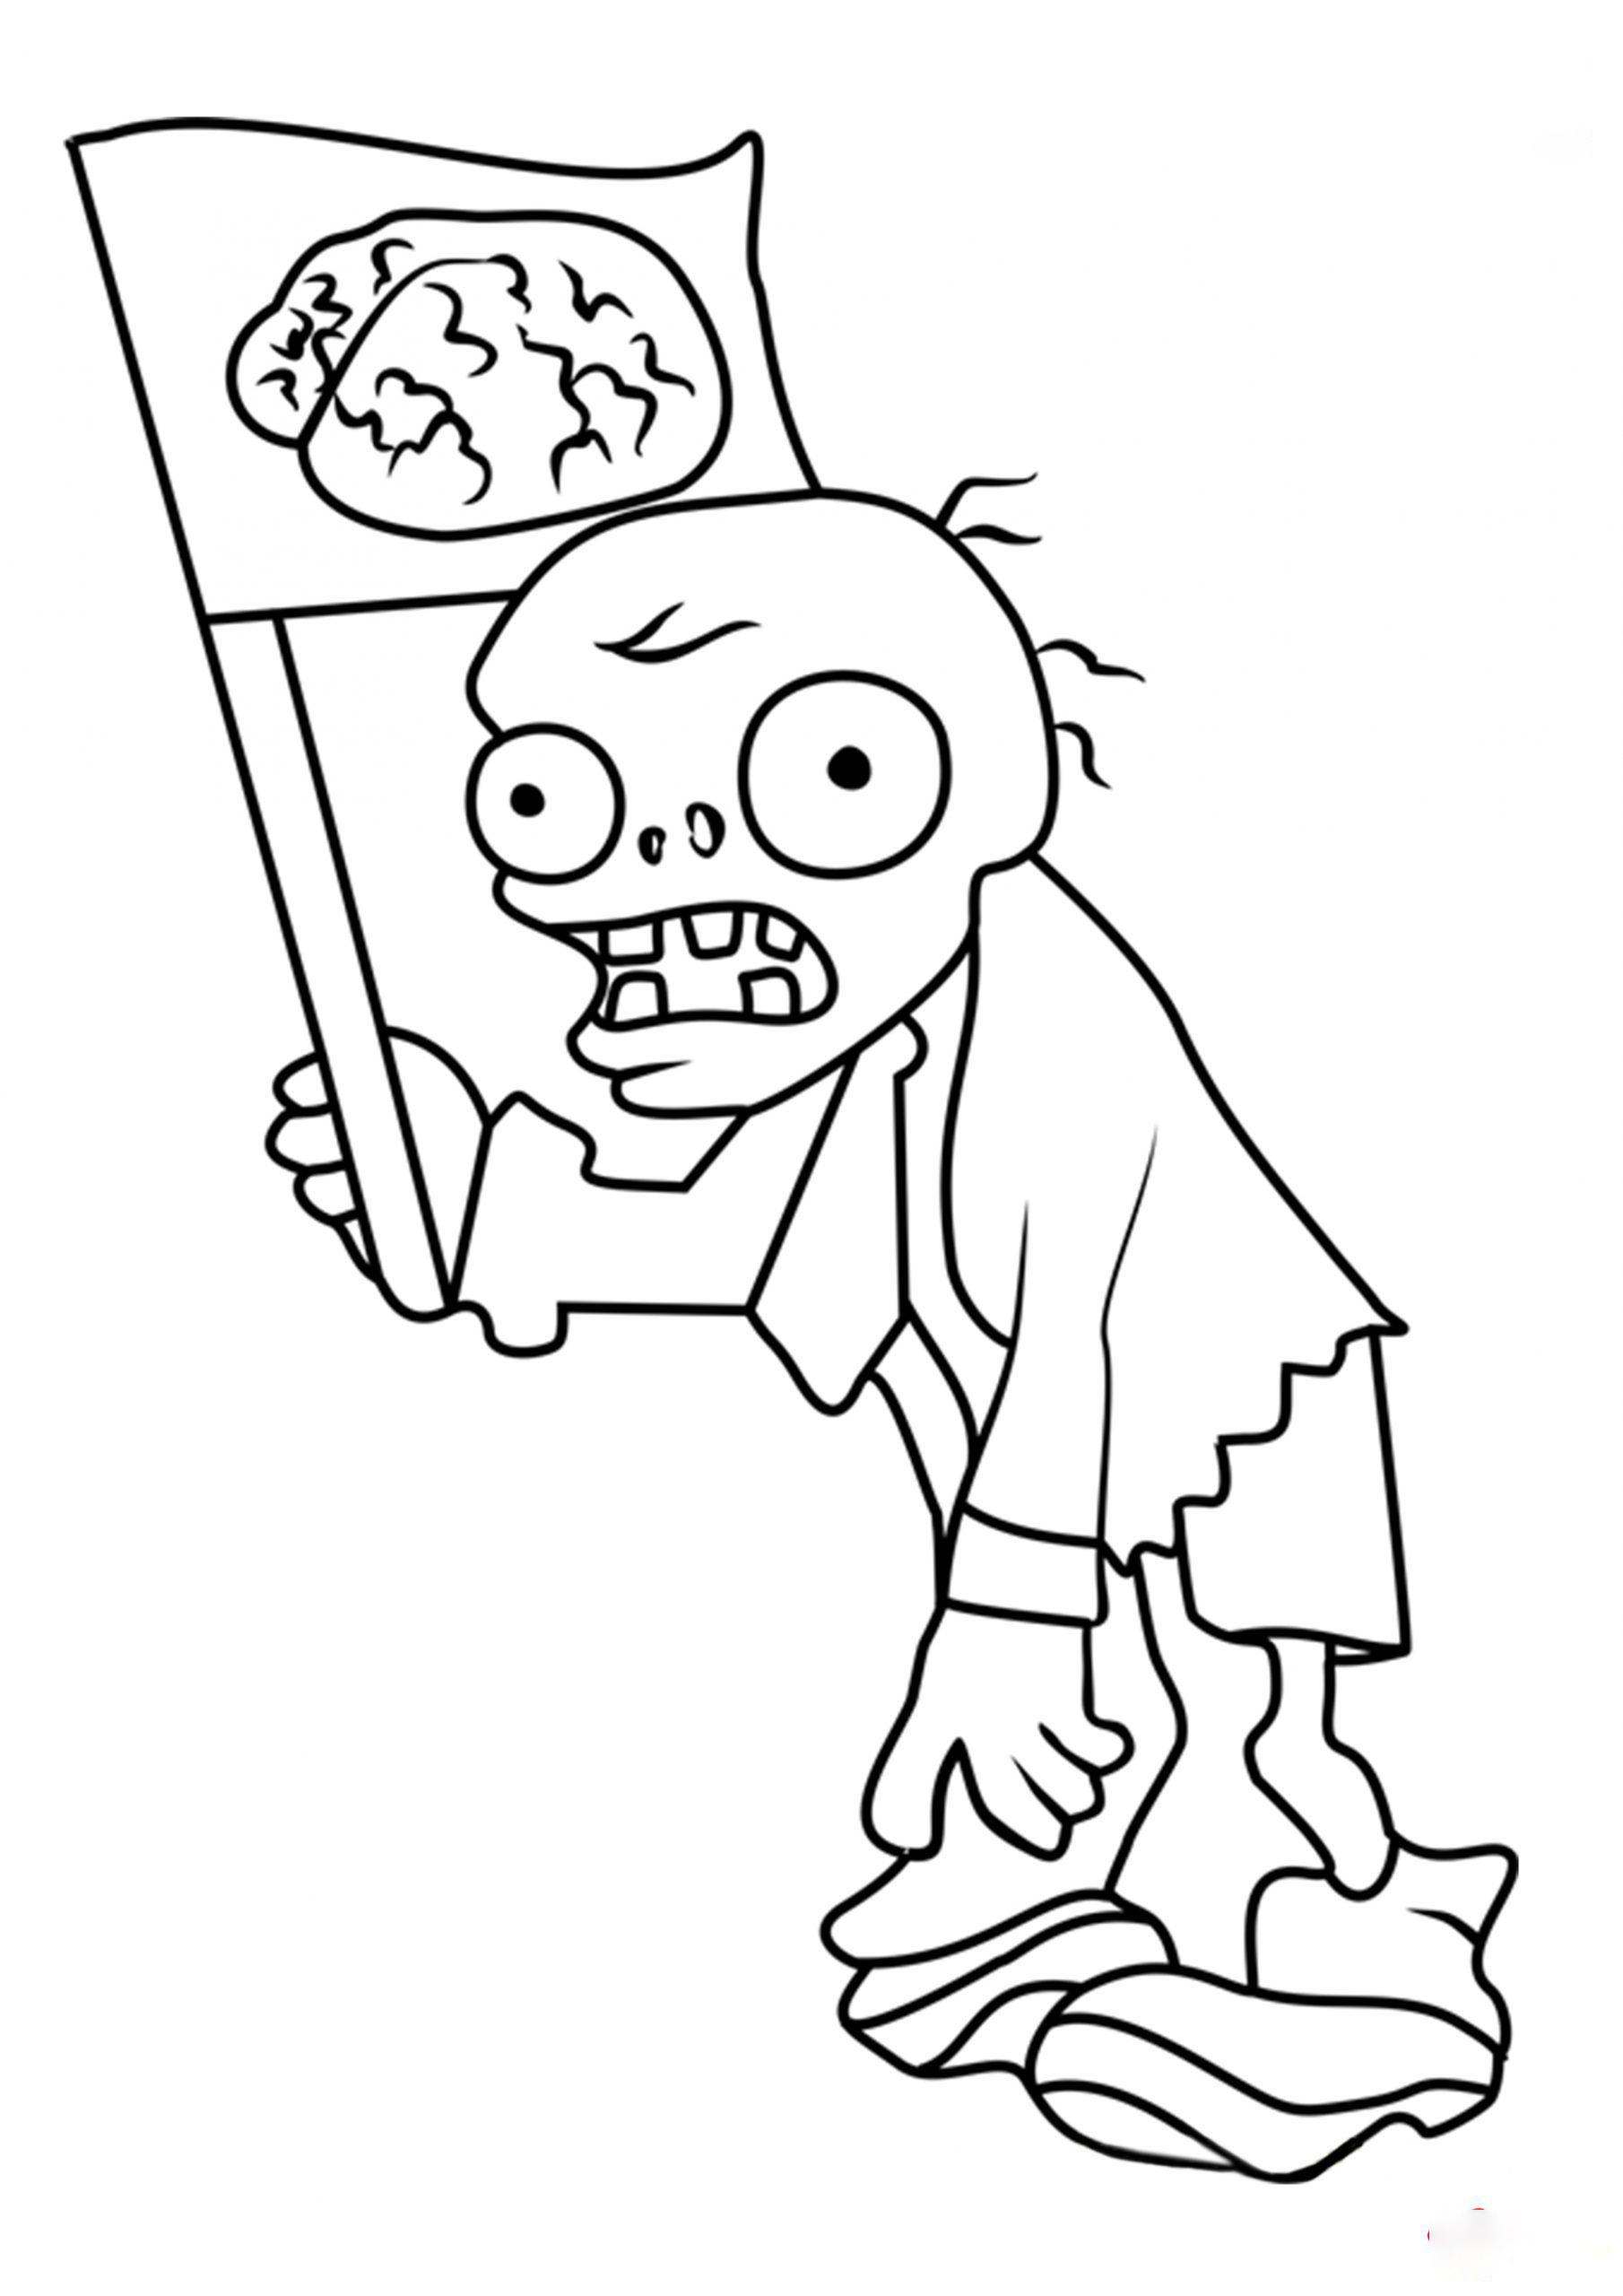 Flag Zombie Coloring Page - Free Printable Coloring Pages